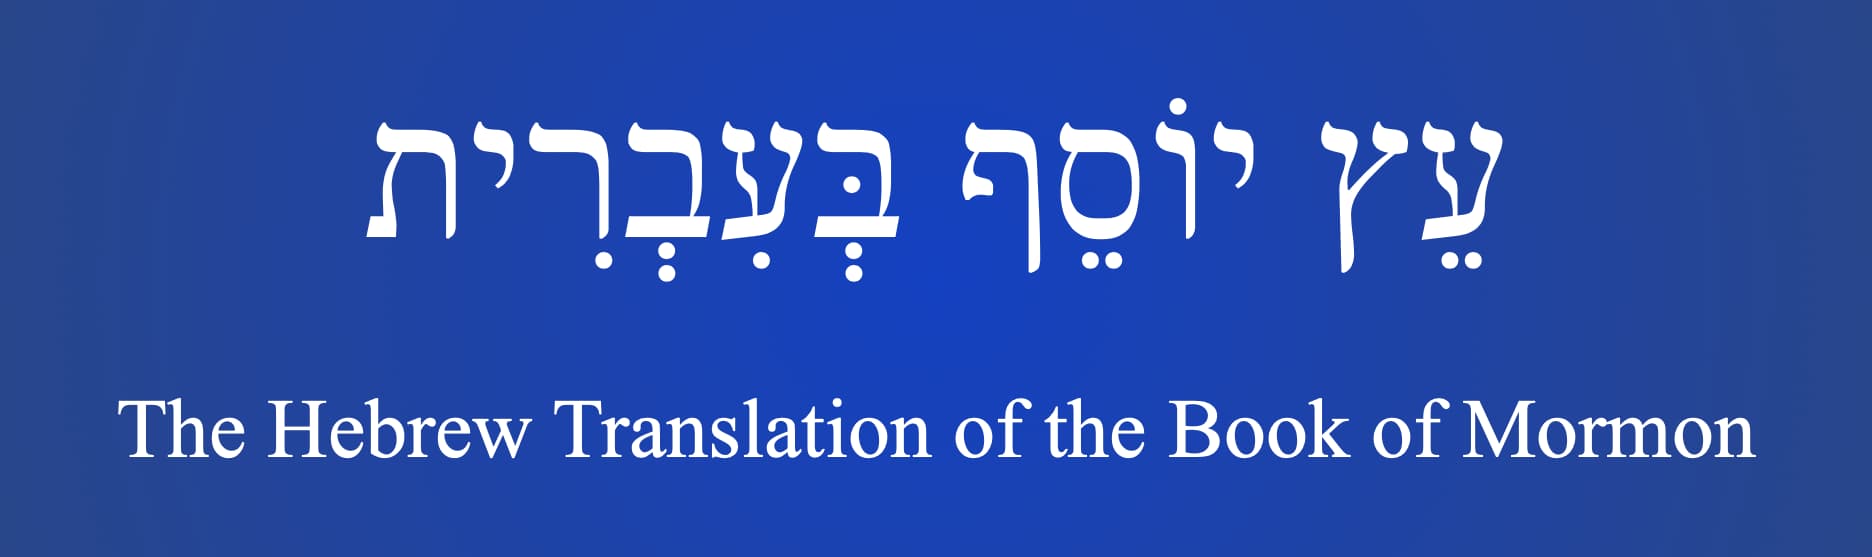 The Hebrew Translation of the Book of Mormon